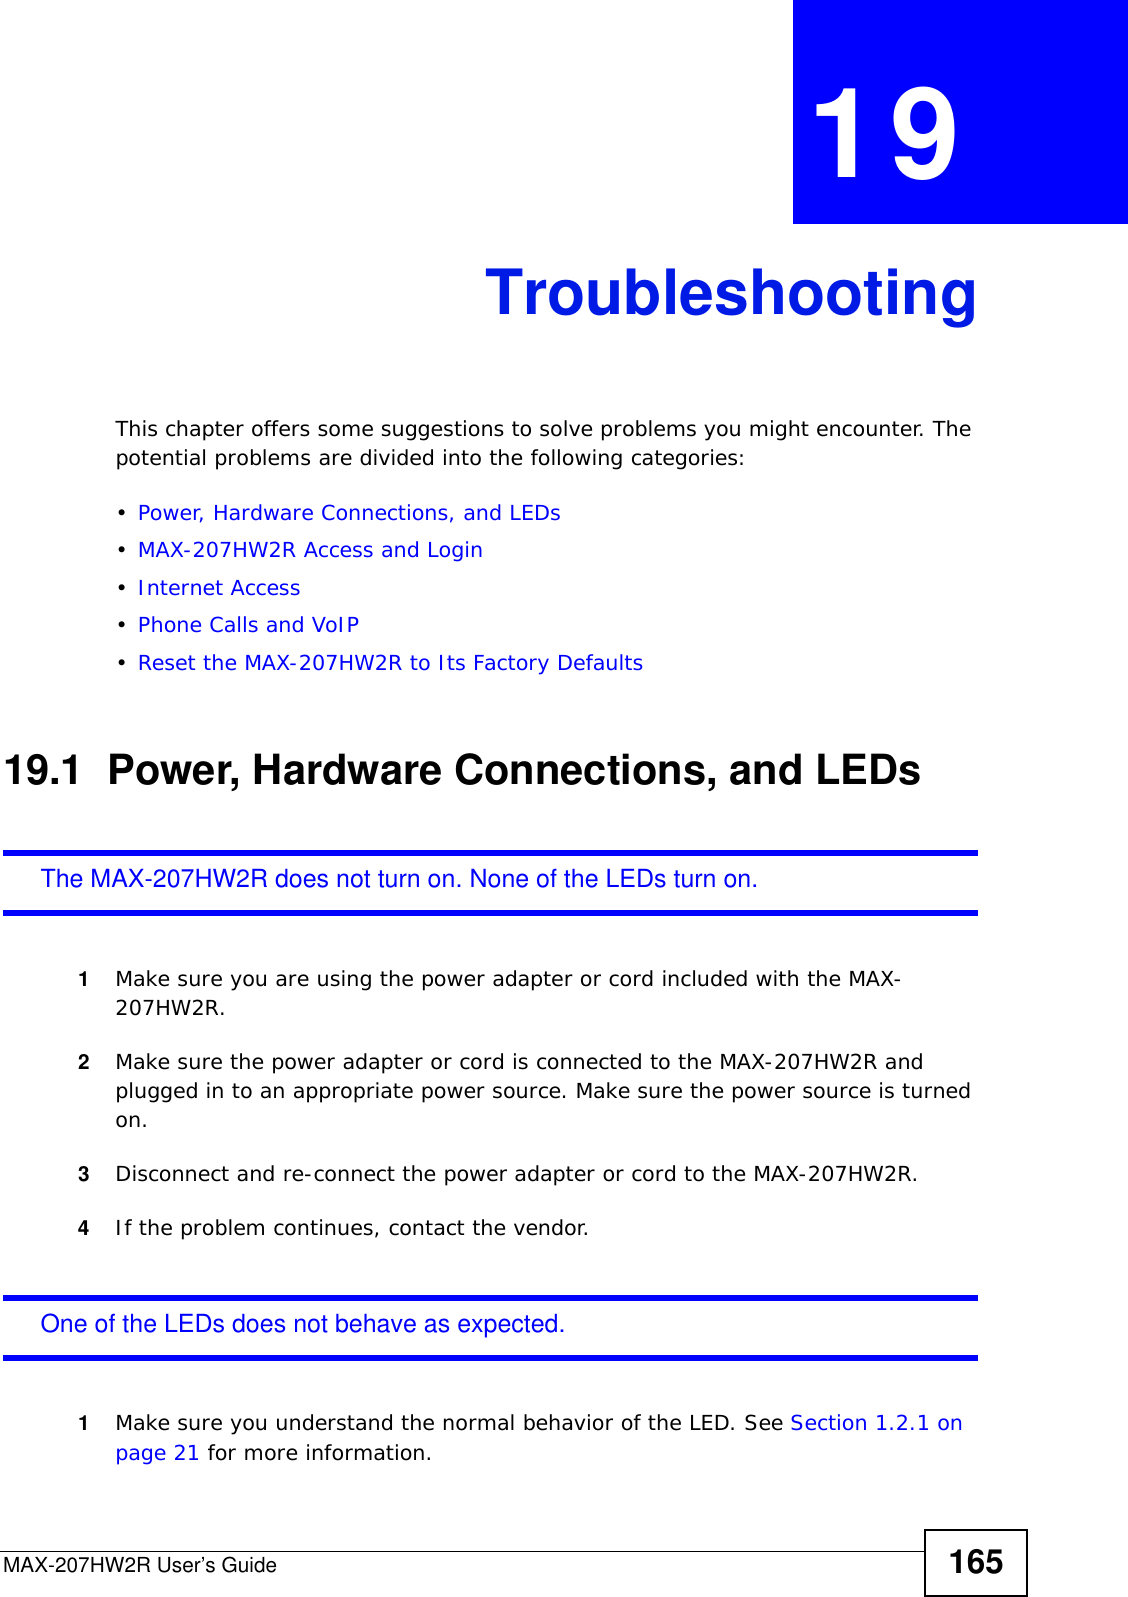 MAX-207HW2R User’s Guide 165CHAPTER  19 TroubleshootingThis chapter offers some suggestions to solve problems you might encounter. The potential problems are divided into the following categories:•Power, Hardware Connections, and LEDs•MAX-207HW2R Access and Login•Internet Access•Phone Calls and VoIP•Reset the MAX-207HW2R to Its Factory Defaults19.1  Power, Hardware Connections, and LEDsThe MAX-207HW2R does not turn on. None of the LEDs turn on.1Make sure you are using the power adapter or cord included with the MAX-207HW2R.2Make sure the power adapter or cord is connected to the MAX-207HW2R and plugged in to an appropriate power source. Make sure the power source is turned on.3Disconnect and re-connect the power adapter or cord to the MAX-207HW2R.4If the problem continues, contact the vendor.One of the LEDs does not behave as expected.1Make sure you understand the normal behavior of the LED. See Section 1.2.1 on page 21 for more information.